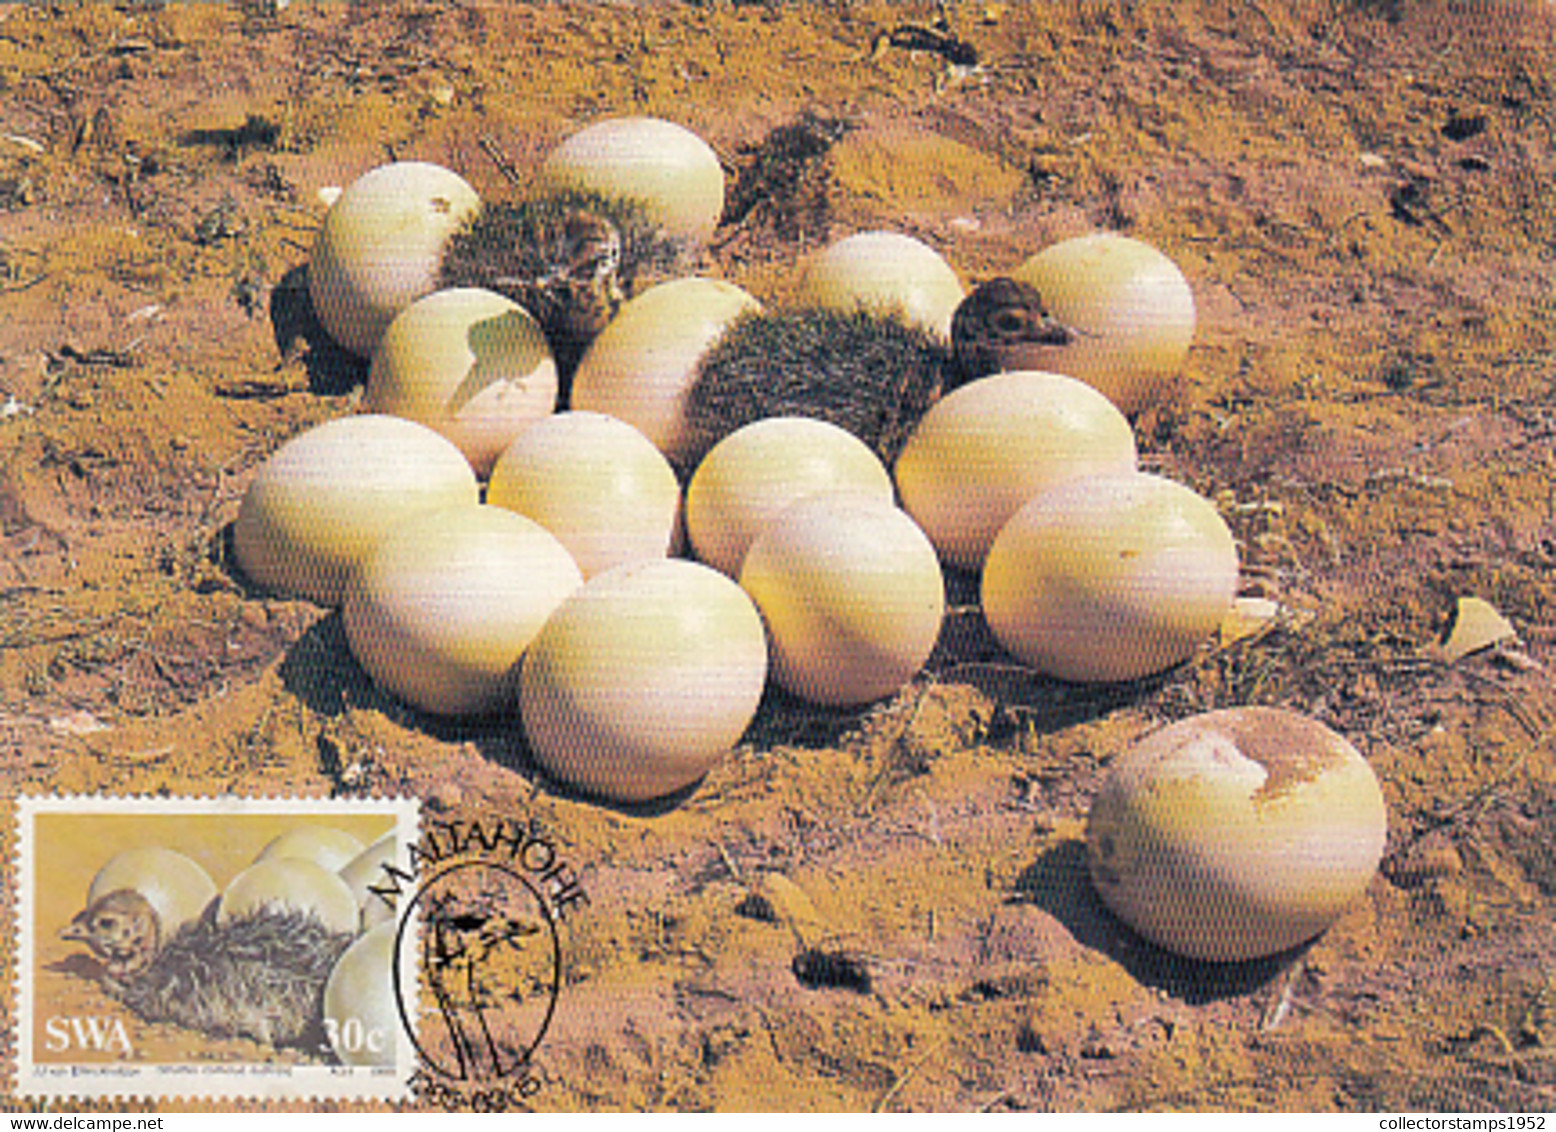 93317- SOUTH AFRICAN OSTRICH, EGGS, HATCHLINGS, BIRDS, ANIMALS, MAXIMUM CARD, 1985, SOUTH AFRICA - Autruches